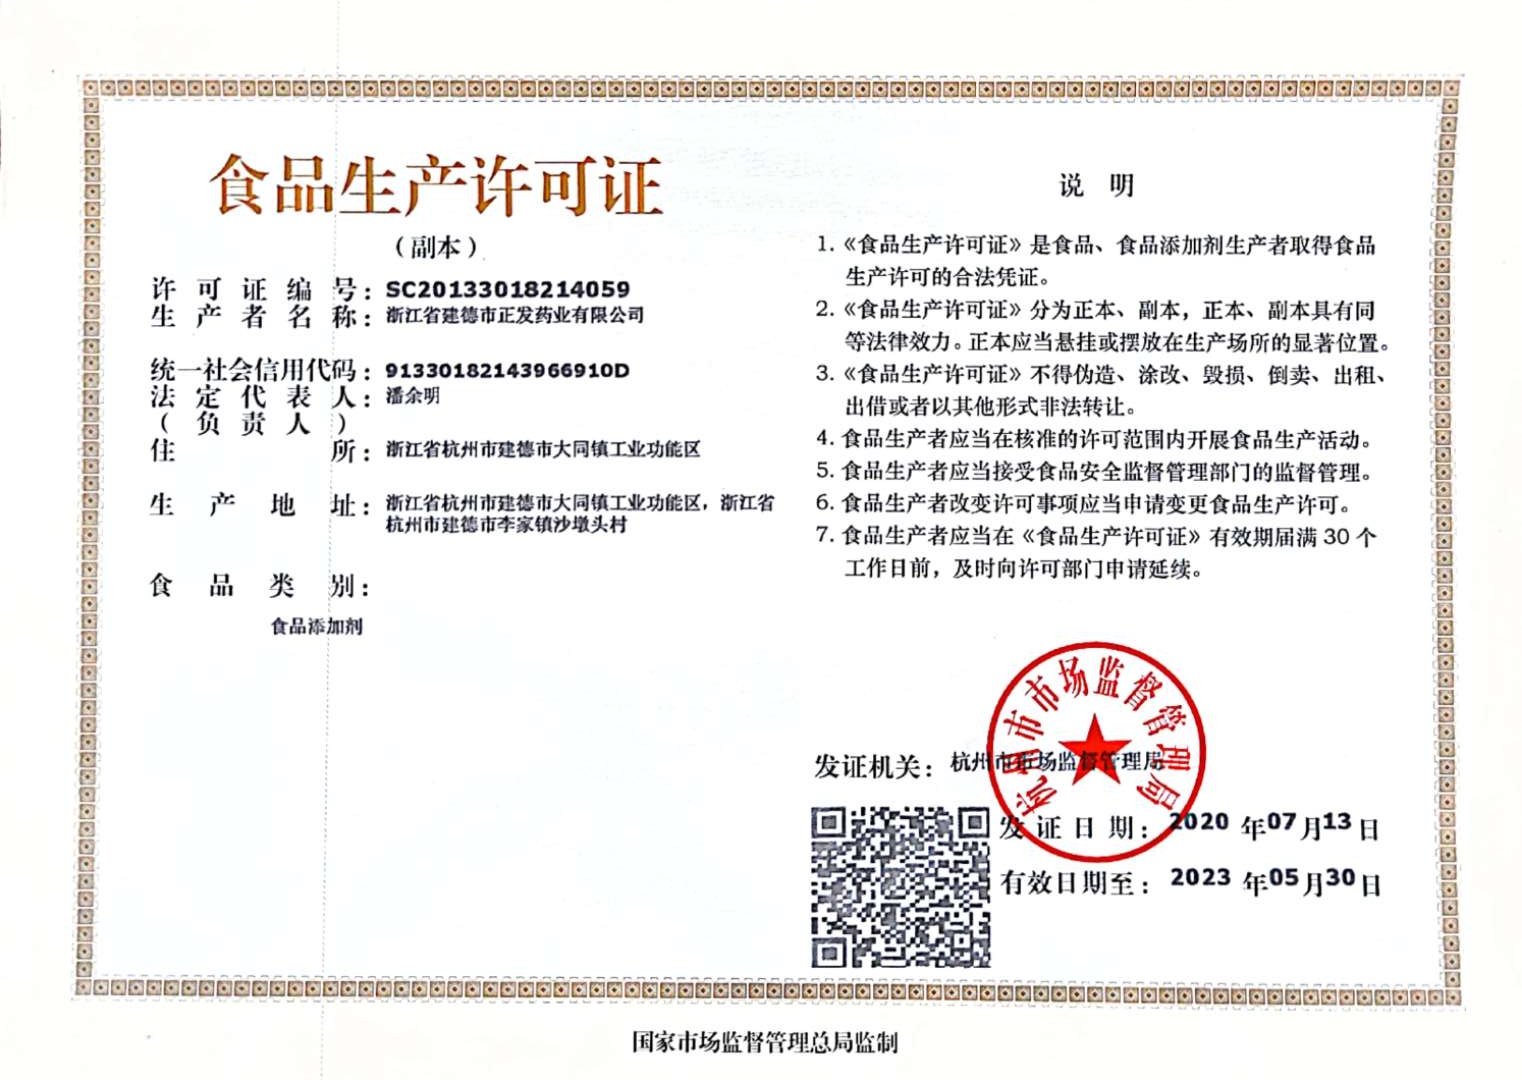 Copy of food production license